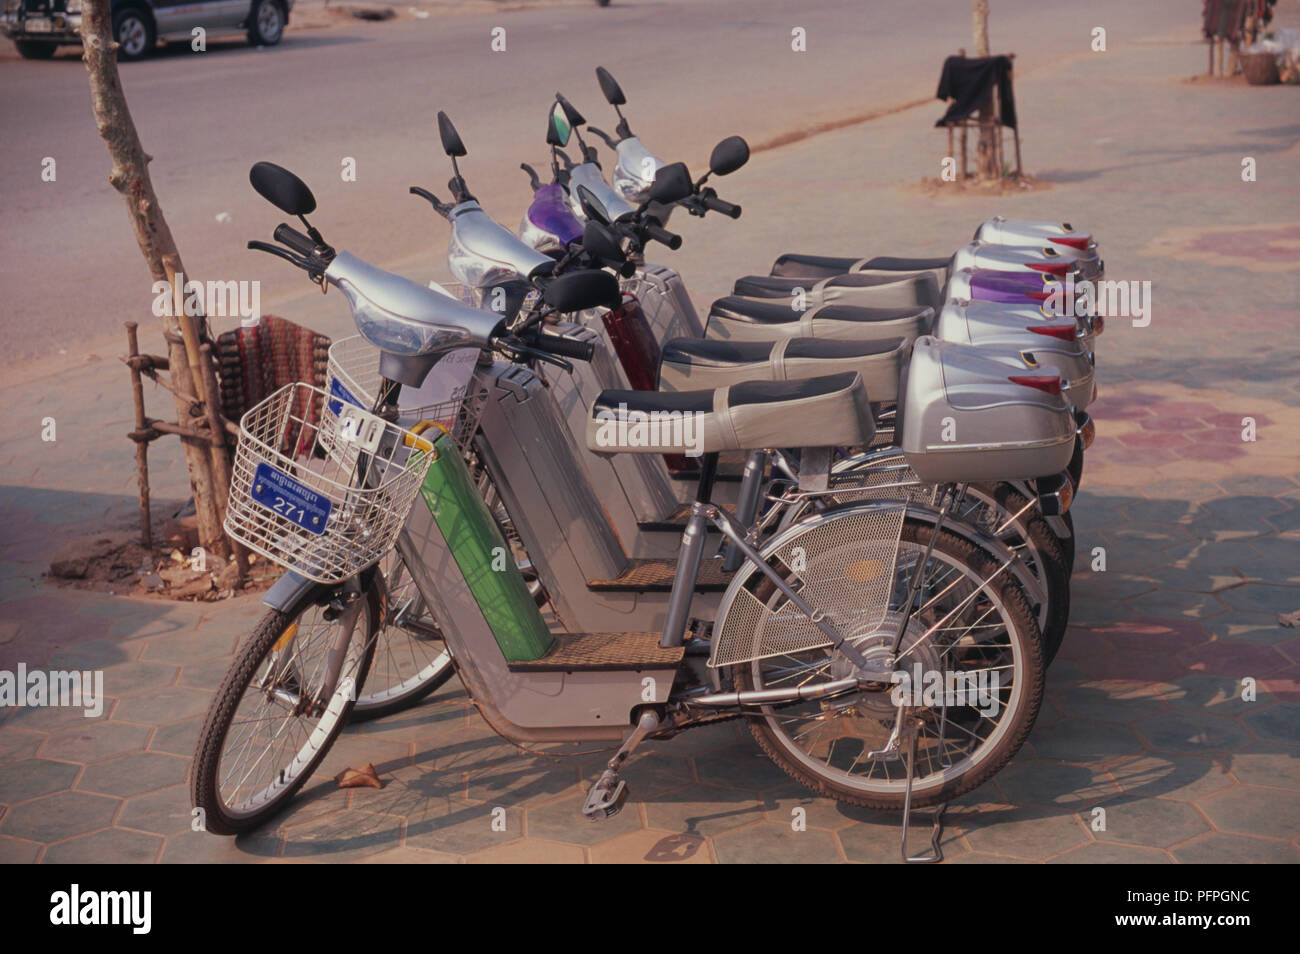 Cambodia, Siem Reap, row of electric bicycles for hire parked in street Stock Photo